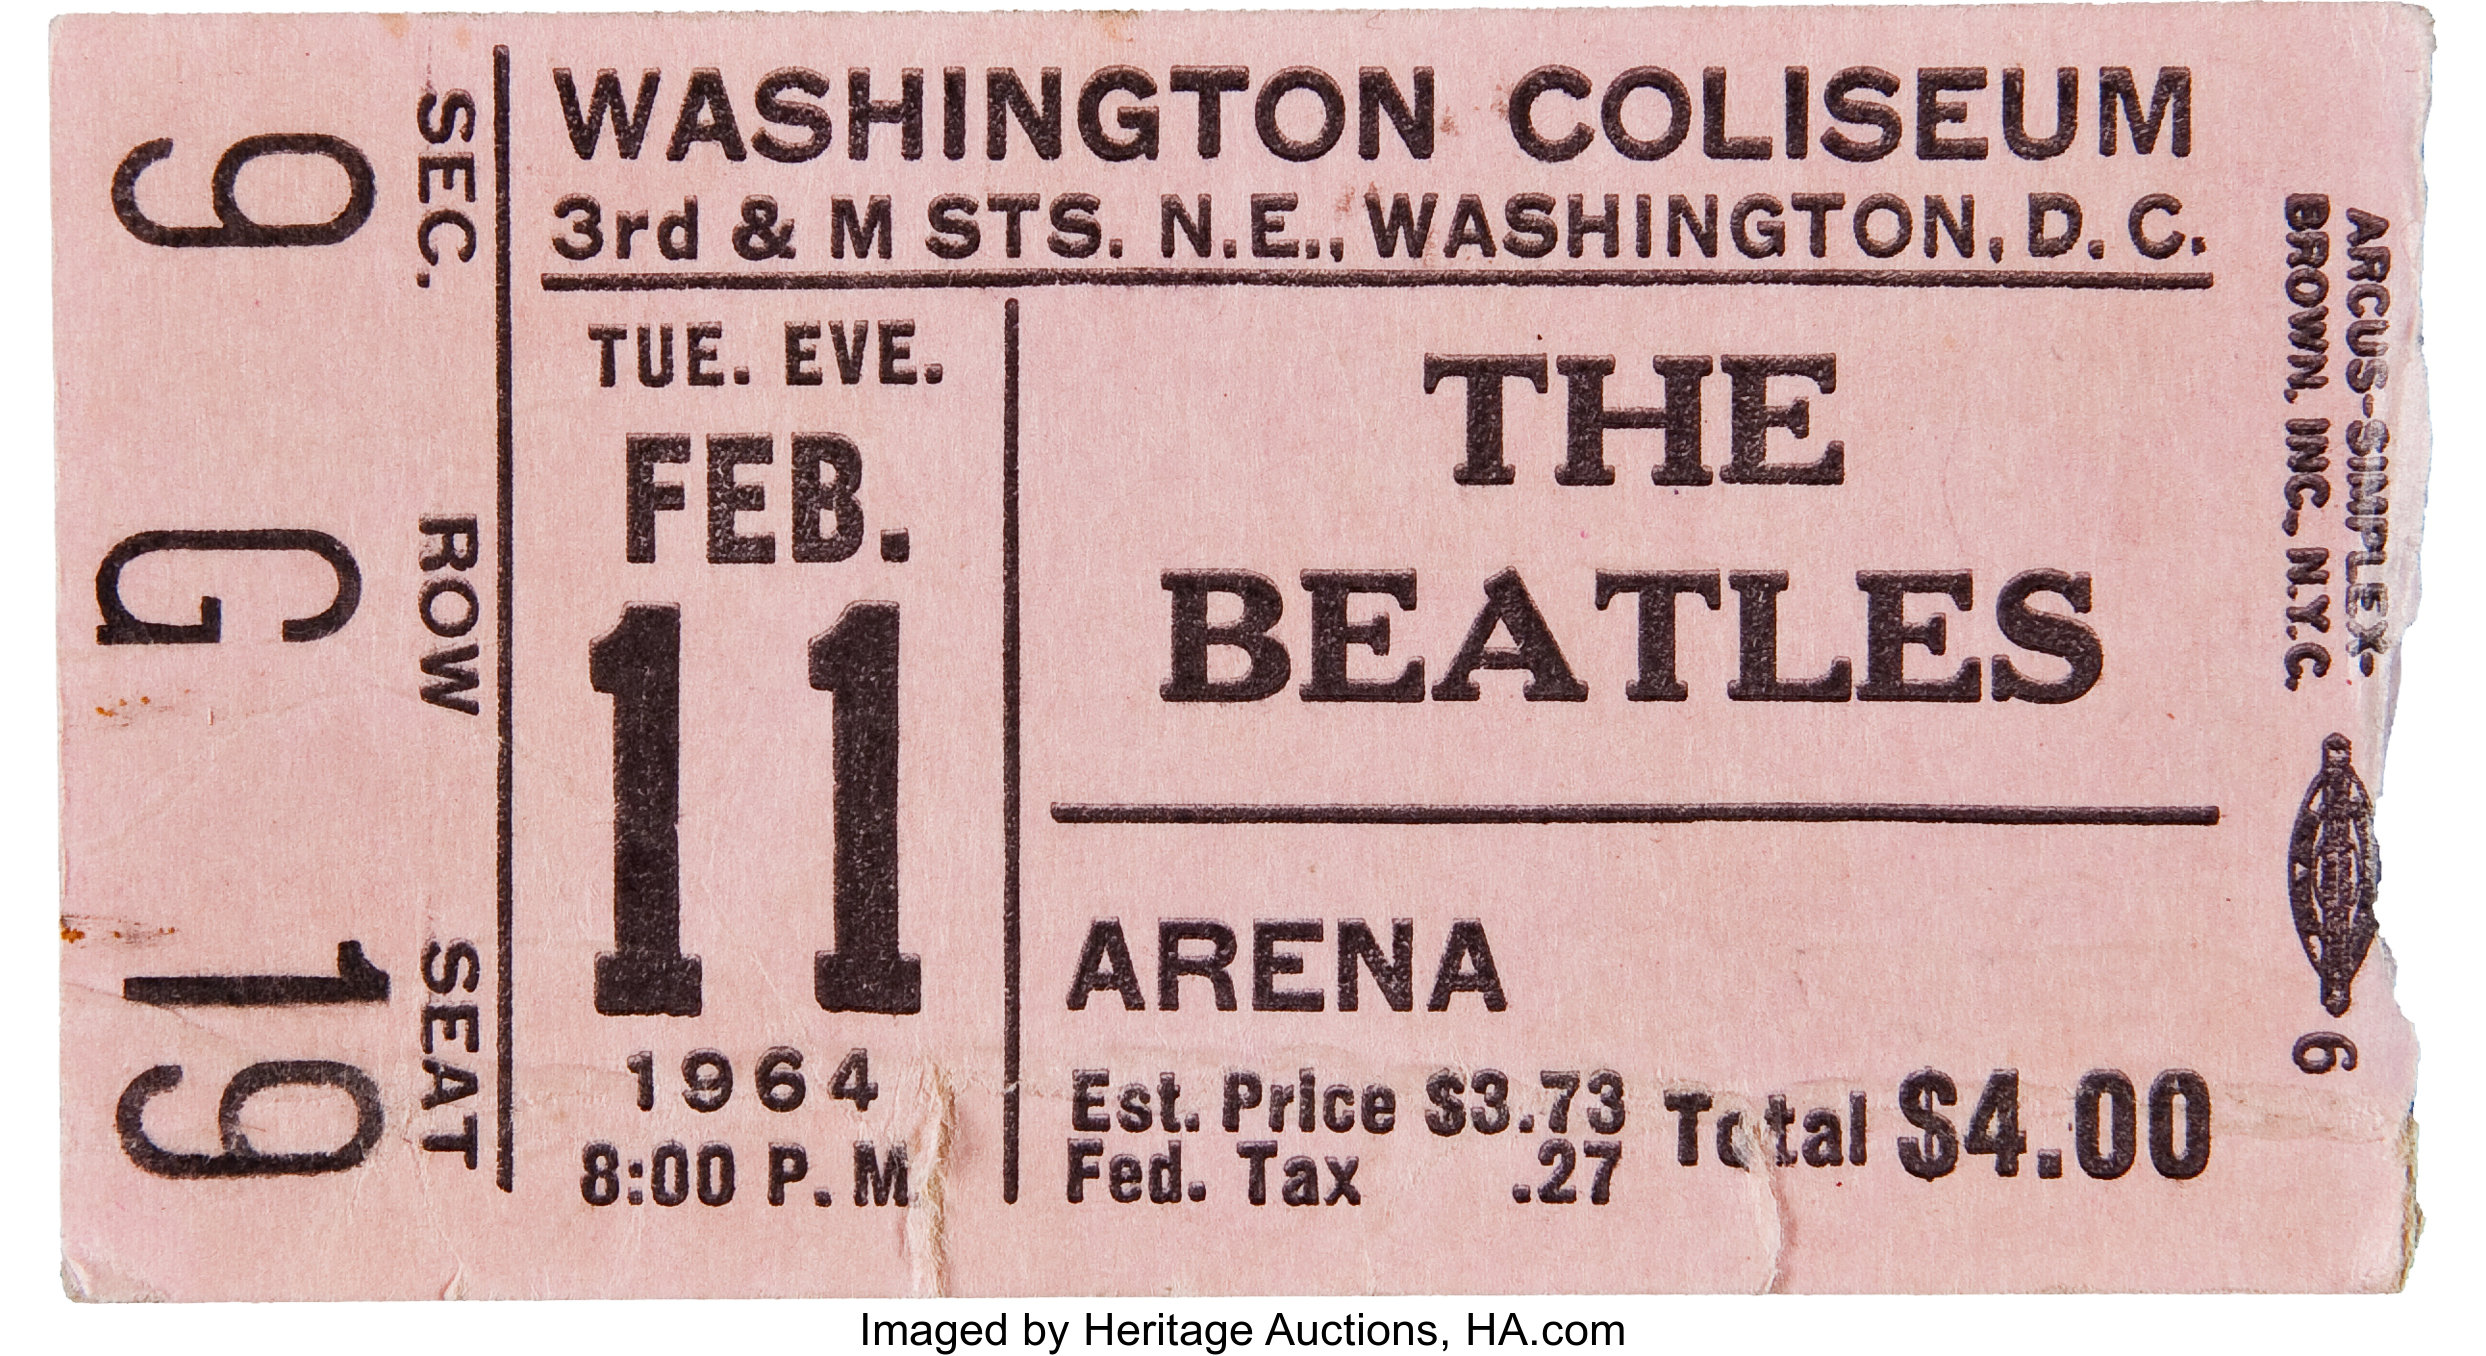 Today is the 1 1964. Only 20 tickets sell for the Concert so far. Одна жизнь билеты